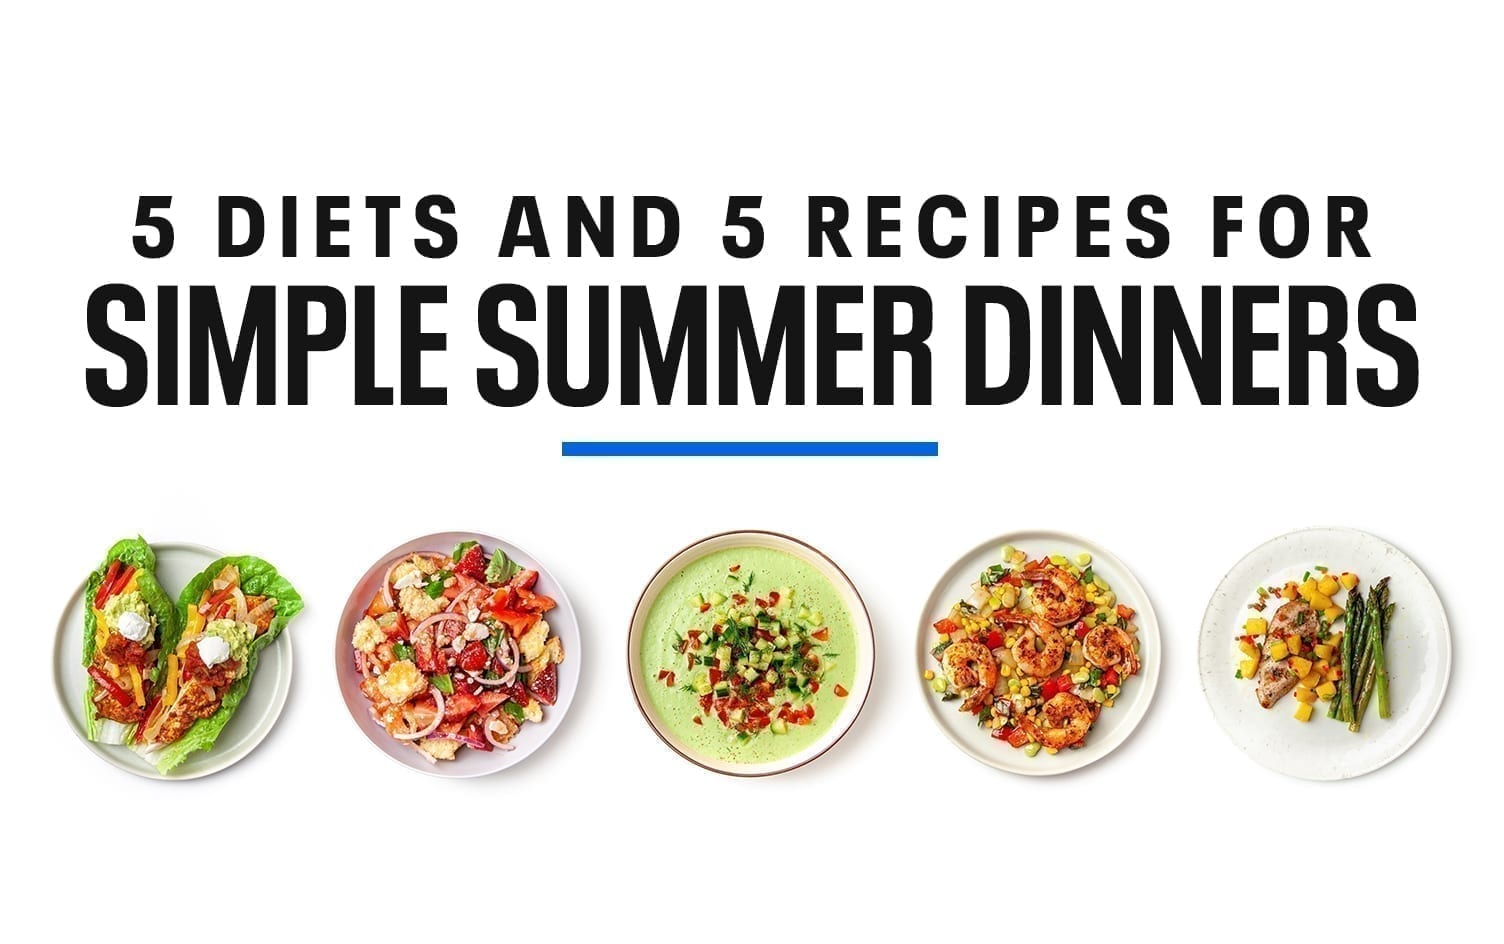 5 Simple Summer Dinners for 5 Diets